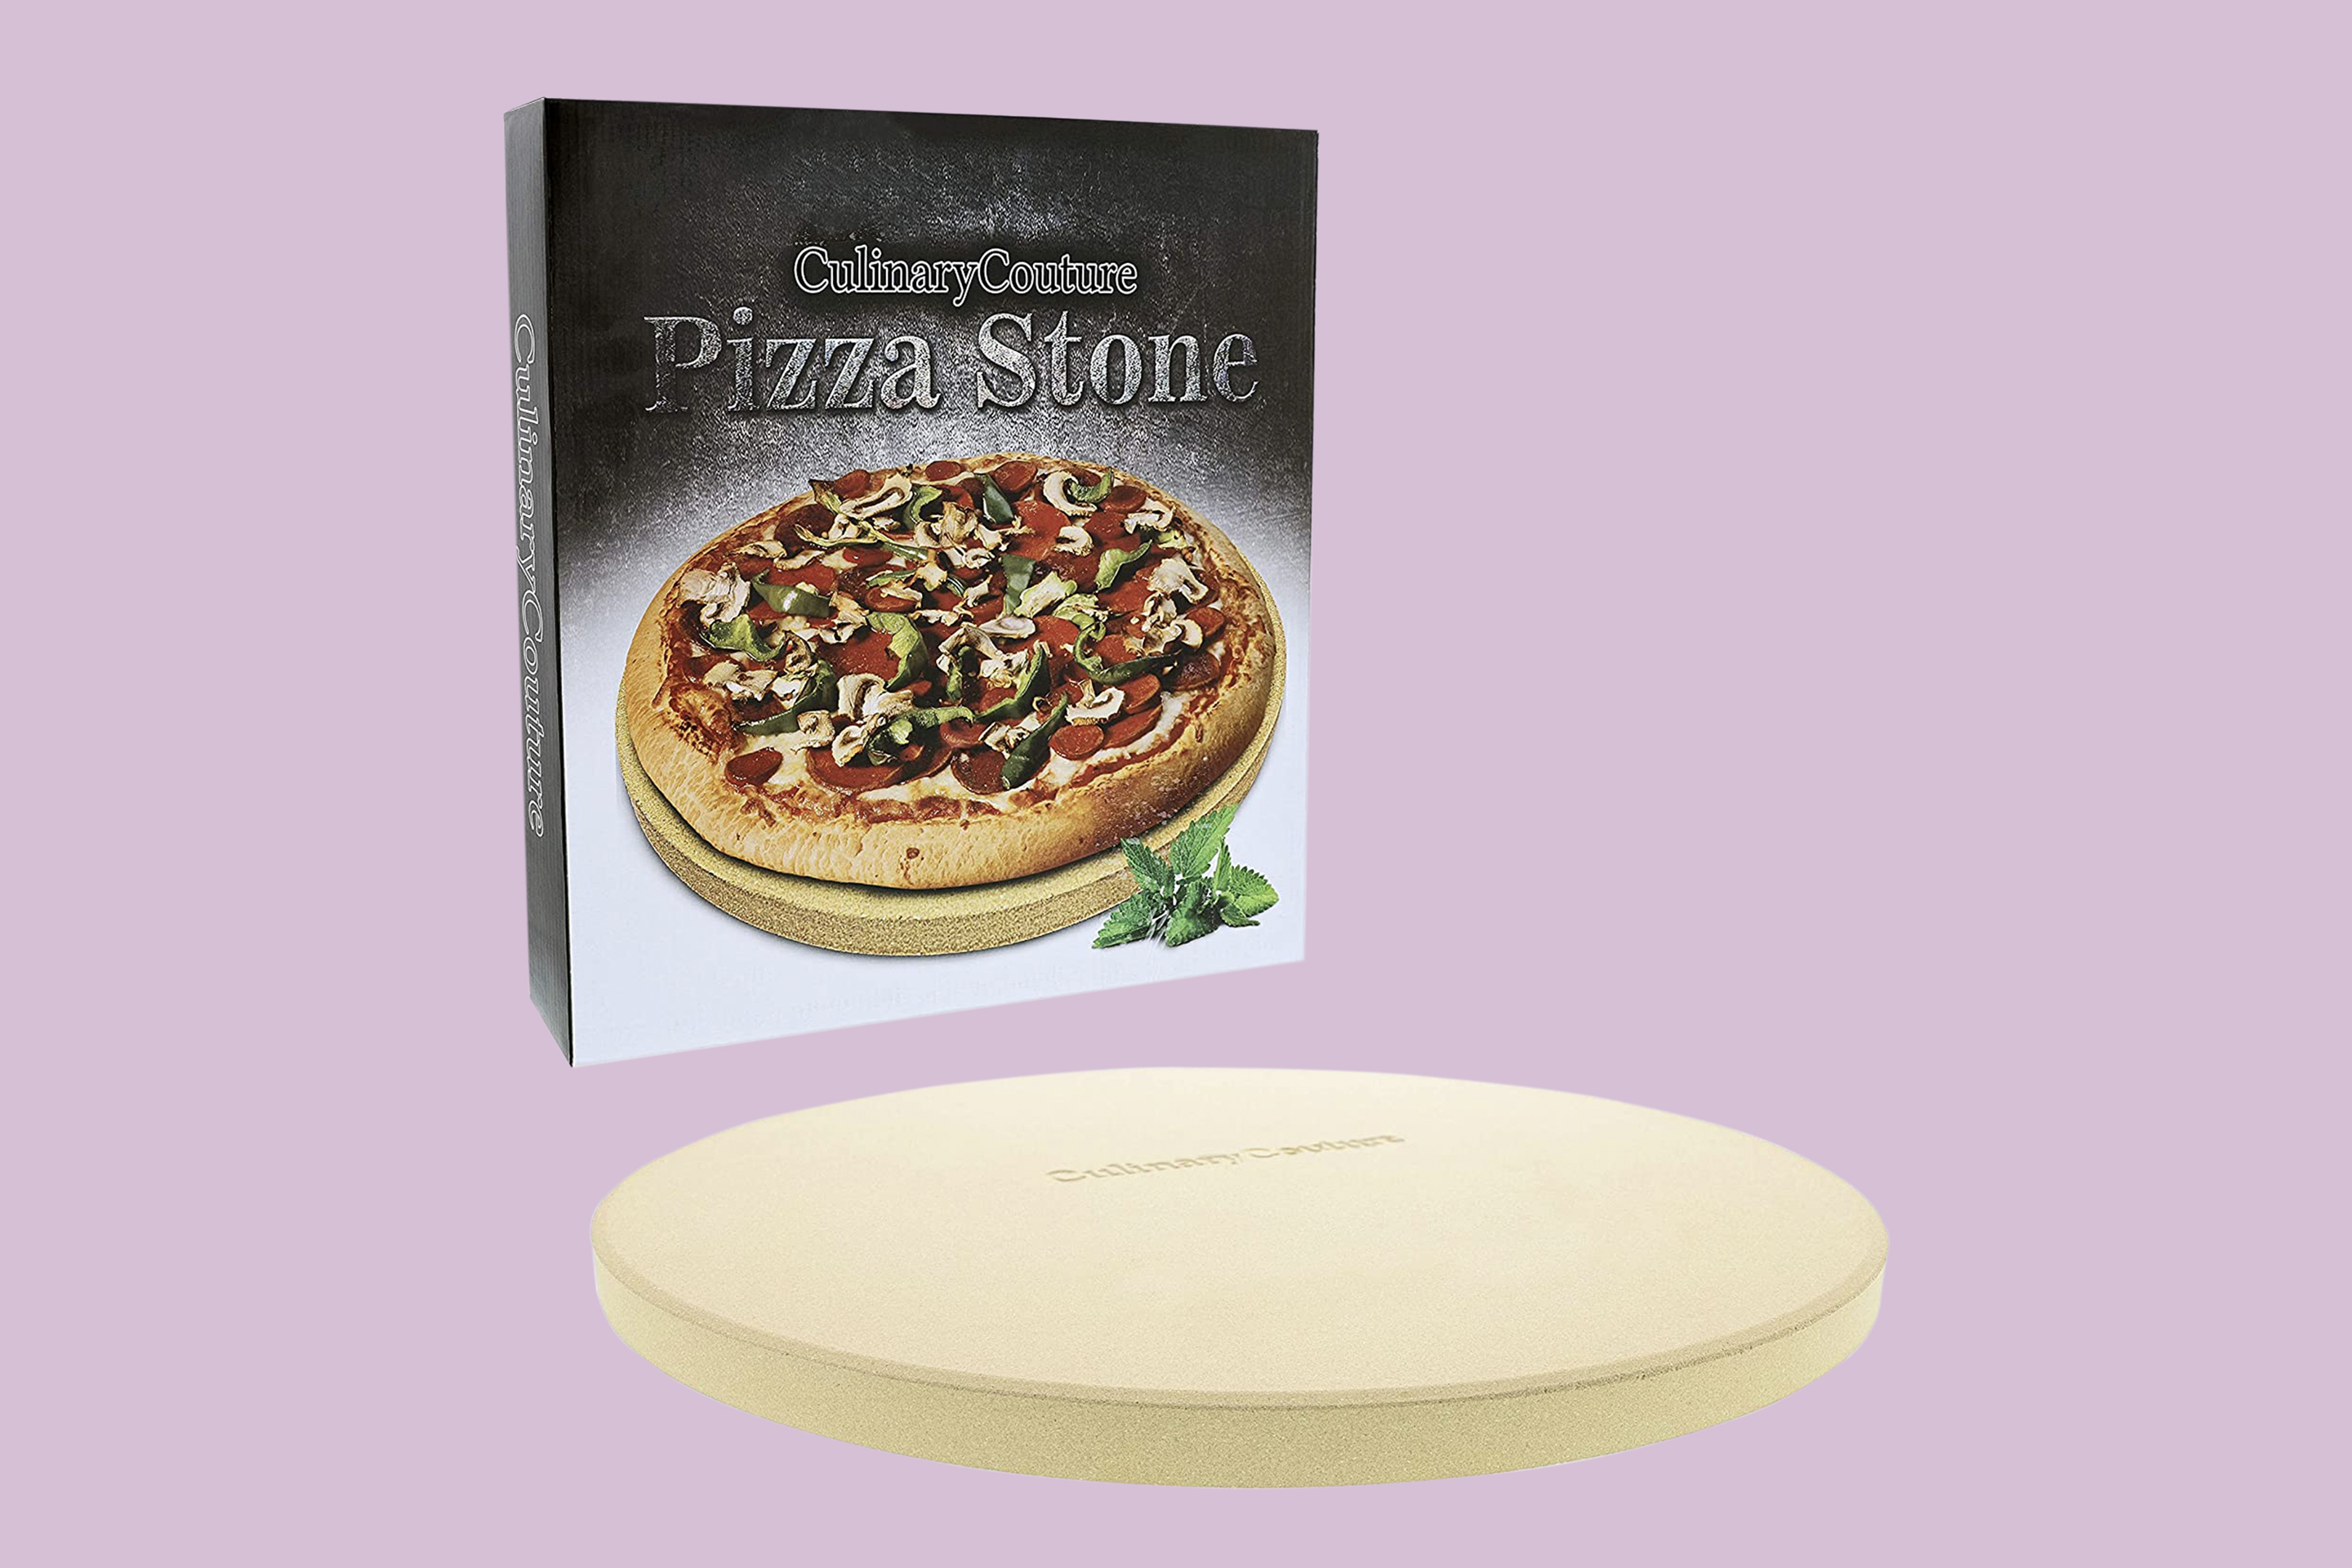 Baking Stone for Pizza Like at The Italian Pizza Stone Made of high Quality Cordierite for Oven & Grill DOLCE MARE Pizza Stone Round Incl Also as Bread Baking Stone Aluminum Pizza Slider 